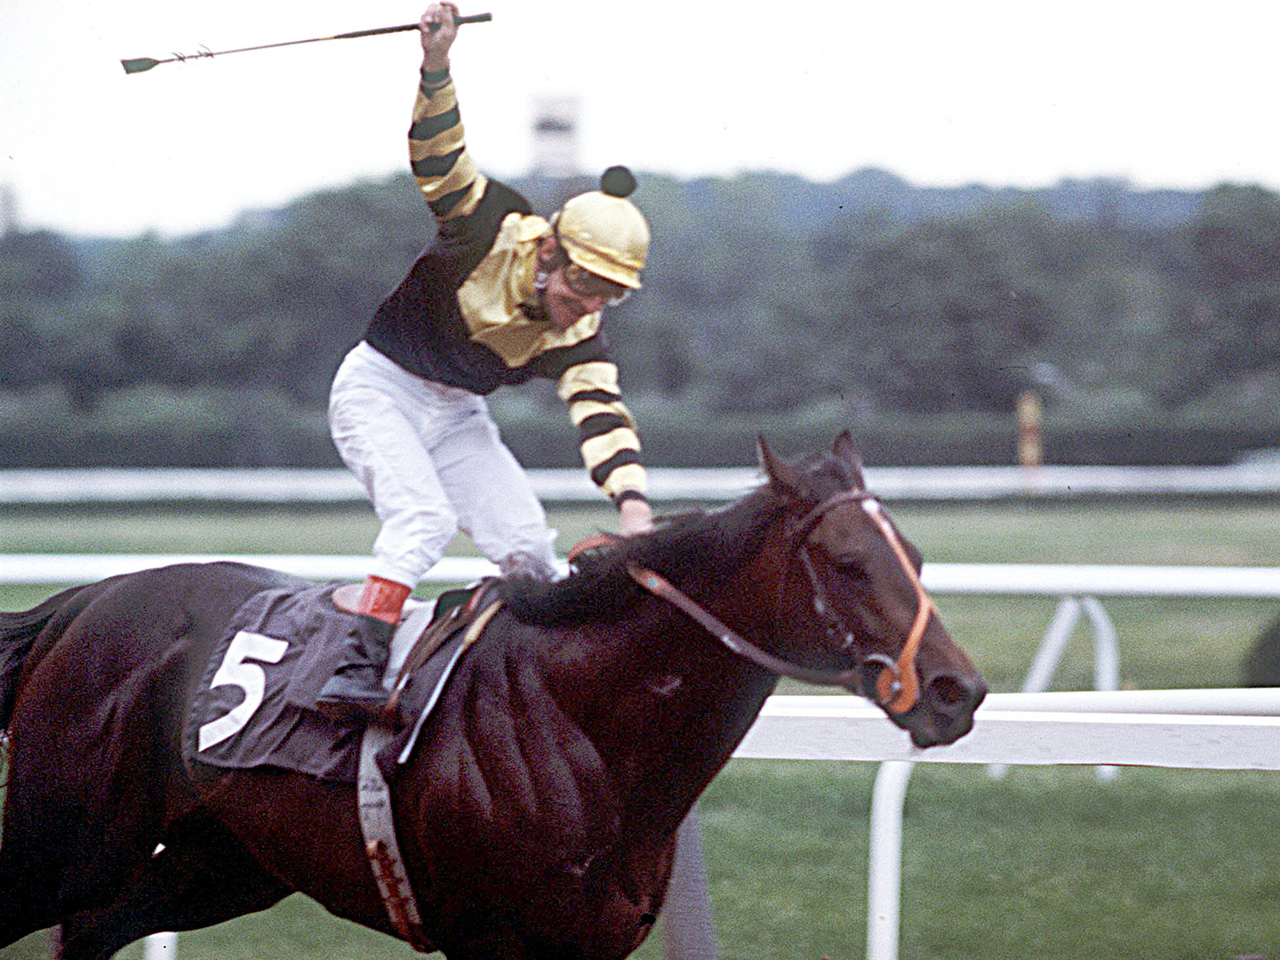 Jean Cruget celebrates after winning the Triple Crown aboard Seattle Slew (photo via CBS News).